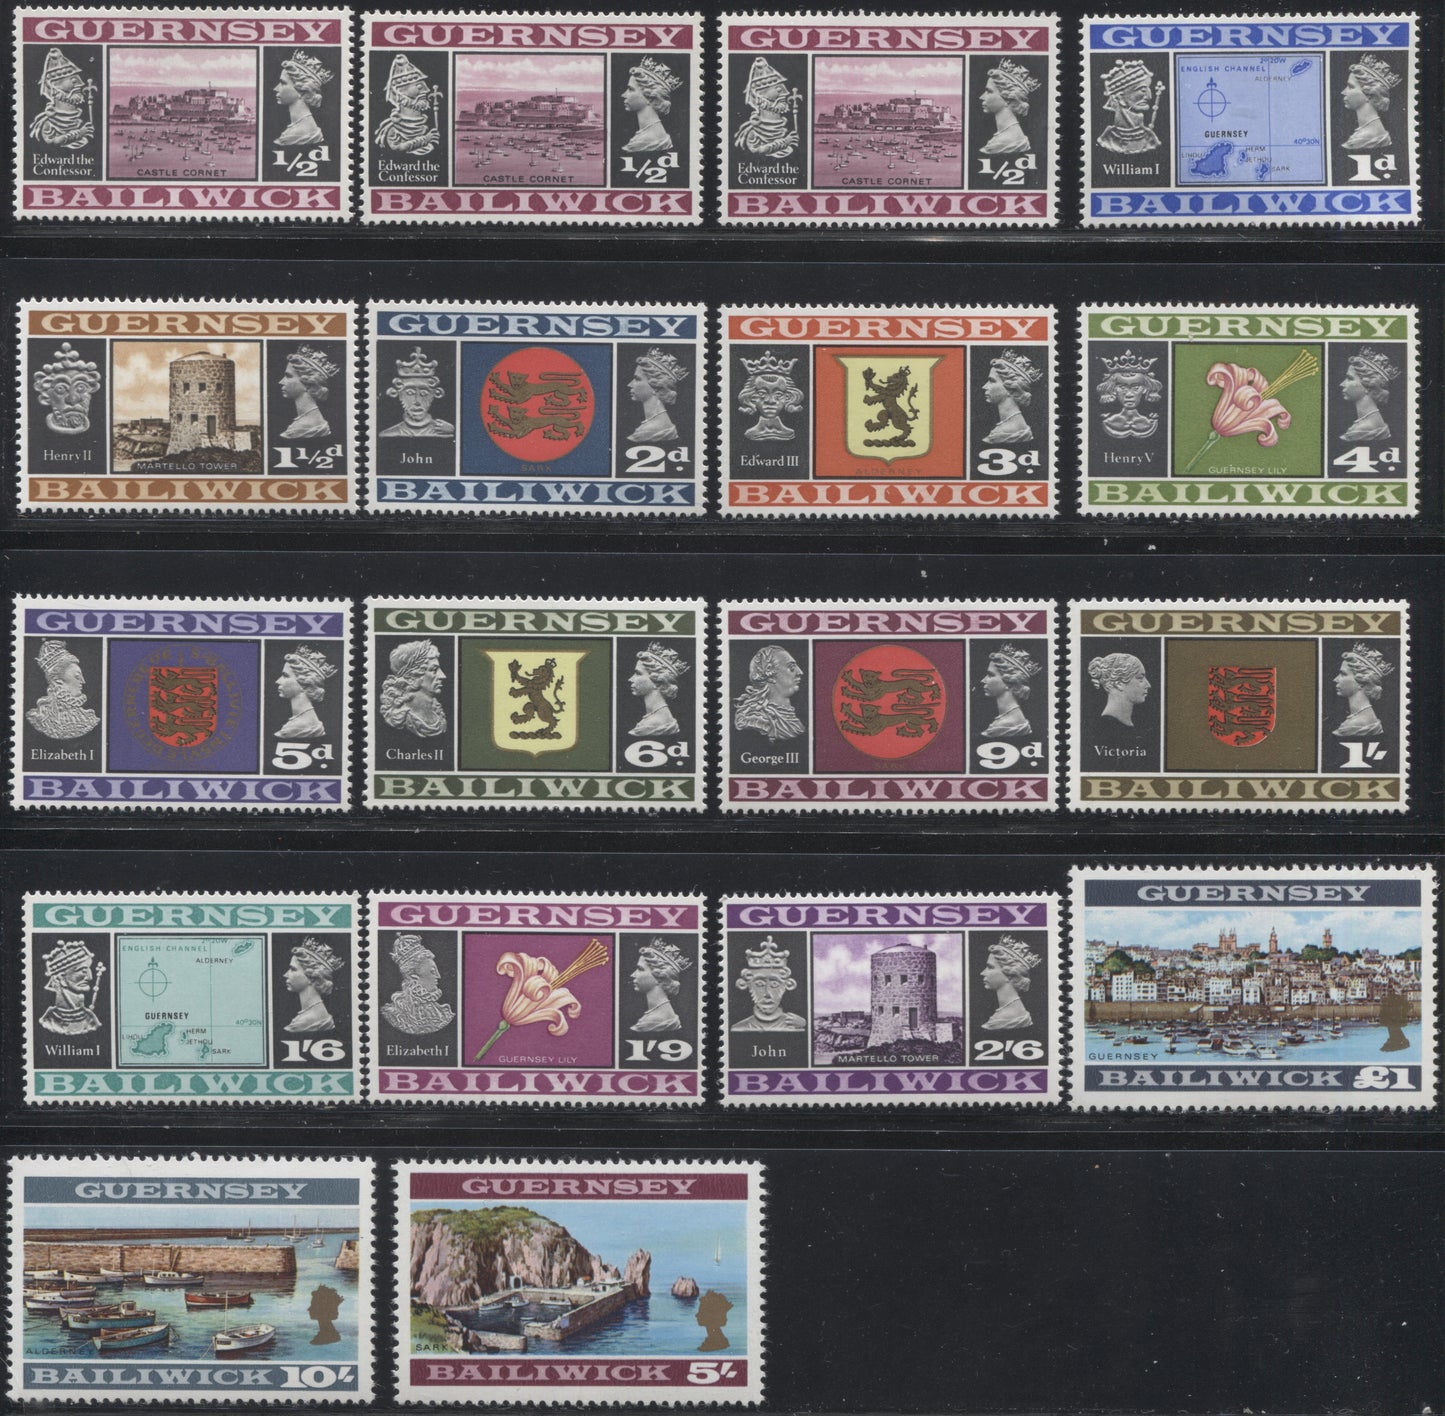 Lot 289 Guernsey Sc#8-23 1969-1970 Pre Decimal Definitive Issue, A Complete VFNH Set, Including Additional Paper Varieties of the 1/2d and 1d